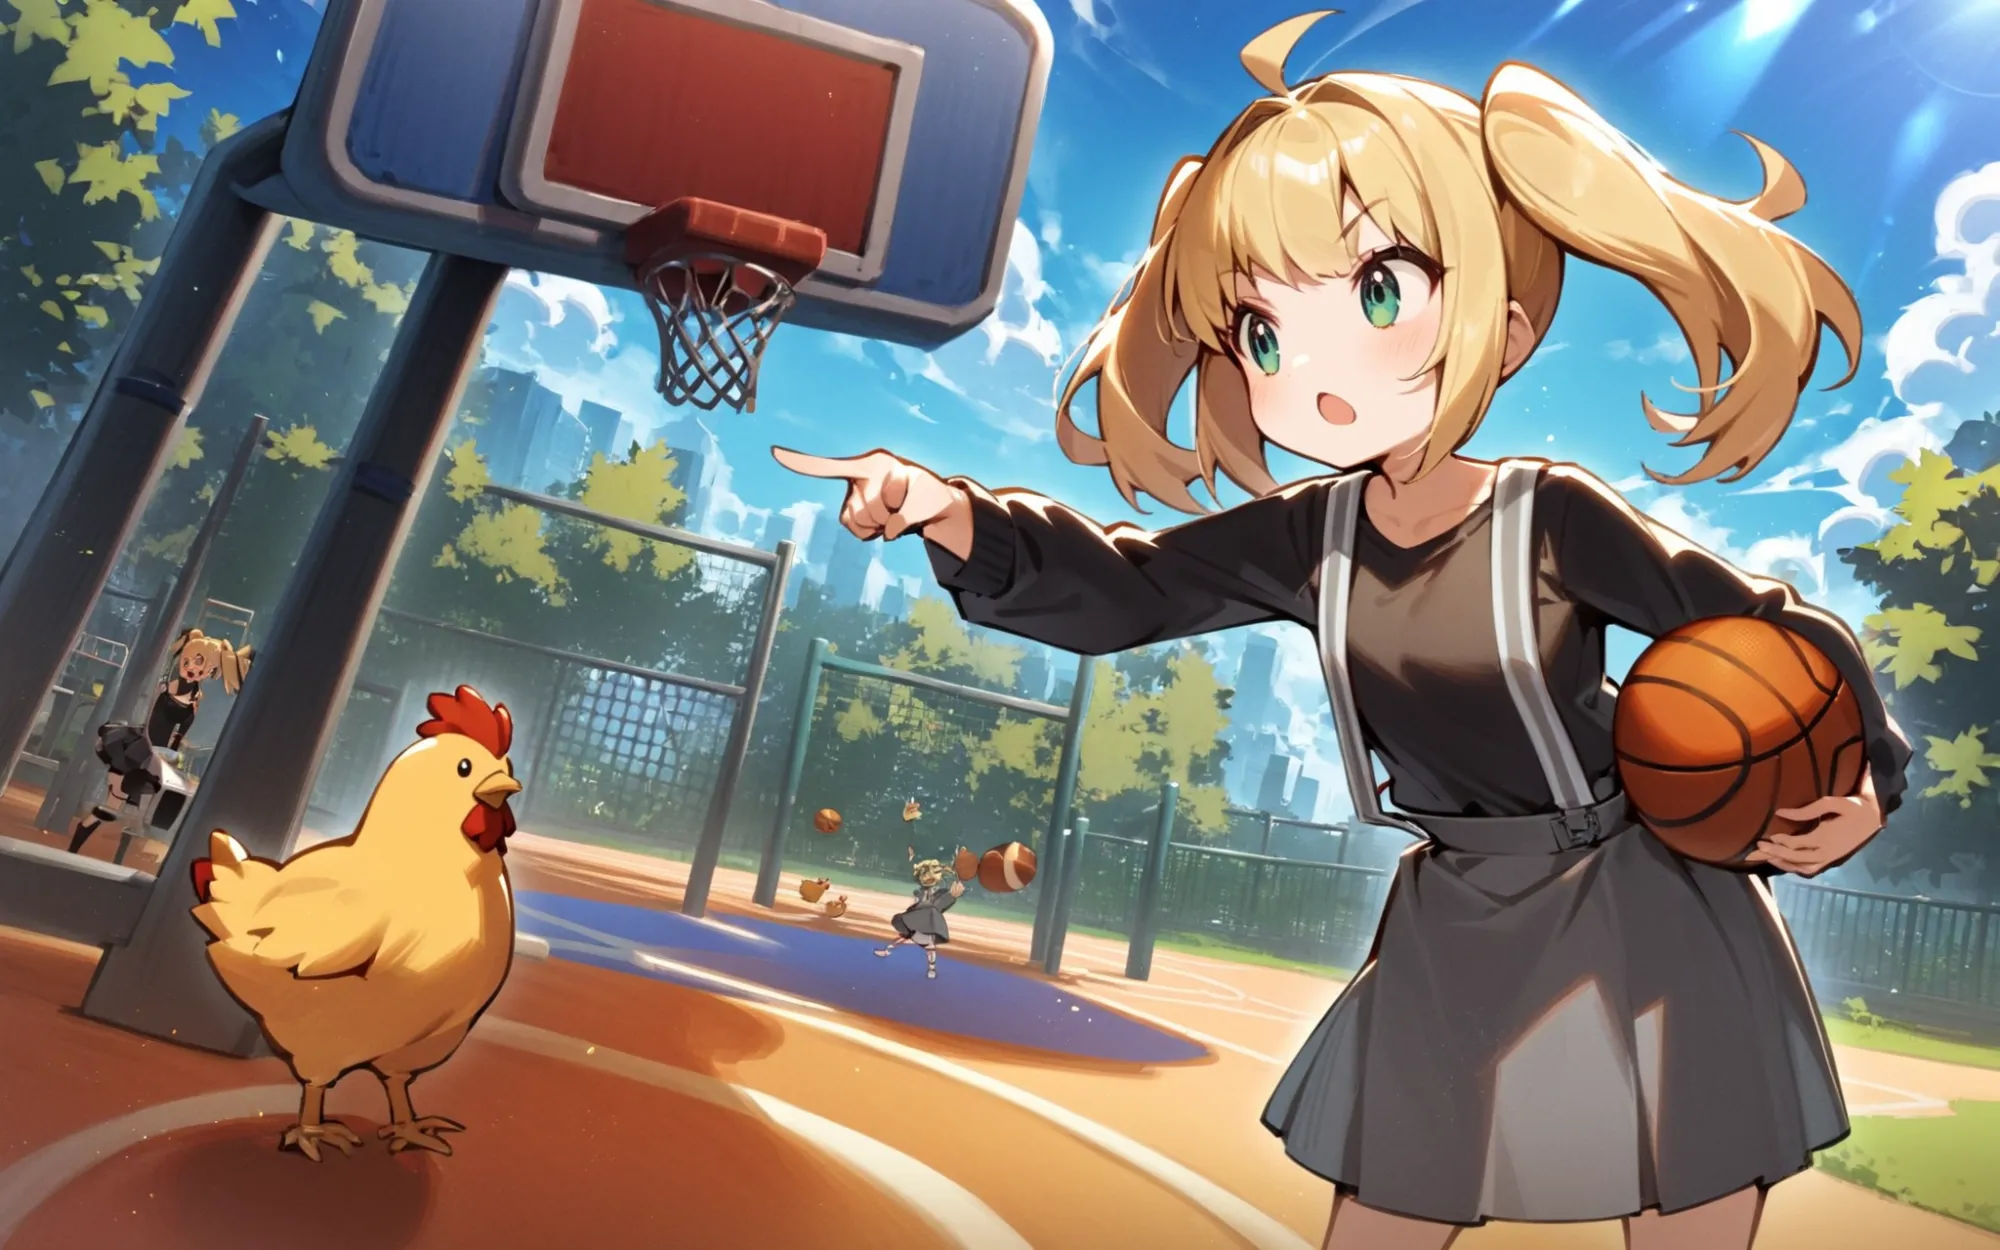 '1girl, play basketball, standing,\nblonde hair, twintails, suspender skirt, grey skirt, black shirt, white strip, long sleeves, outdoors, open mouth, chicken, playground, pointing,\nAlice in glitterworld\nNegative prompt: (worst quality, low quality:1.4), nsfw\nSteps: 30, Sampler: DPM++ 2M Karras, CFG scale: 7, Seed: 1, Size: 1024x640, Model hash: 642b08ca49, Model: ConfusionXL2.0_fp16_vae, Denoising strength: 0.6, Clip skip: 2, Hires upscale: 2, Hires steps: 15, Hires upscaler: ESRGAN_4x, Version: v1.7.0'